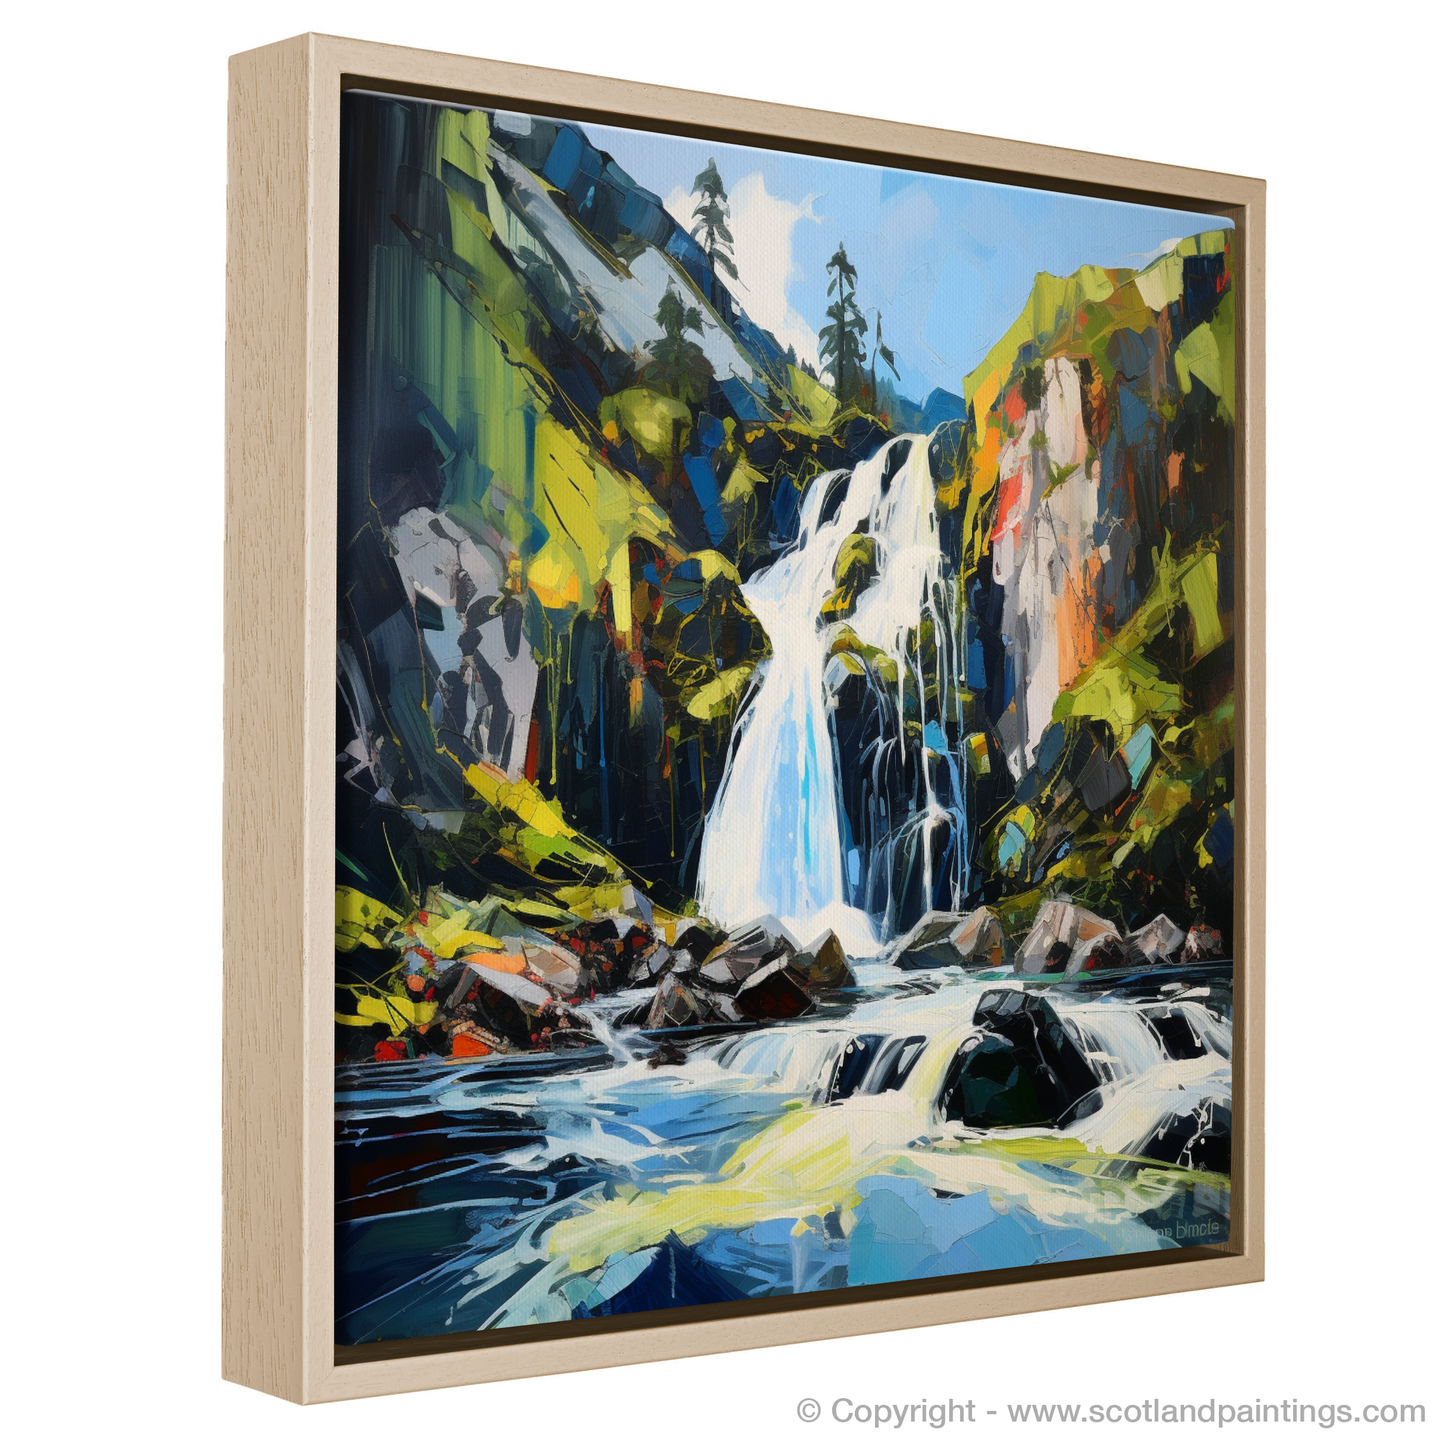 Painting and Art Print of Cascading waterfall in Glencoe entitled "Cascading Majesty: An Expressionist Ode to Glencoe's Waterfall".